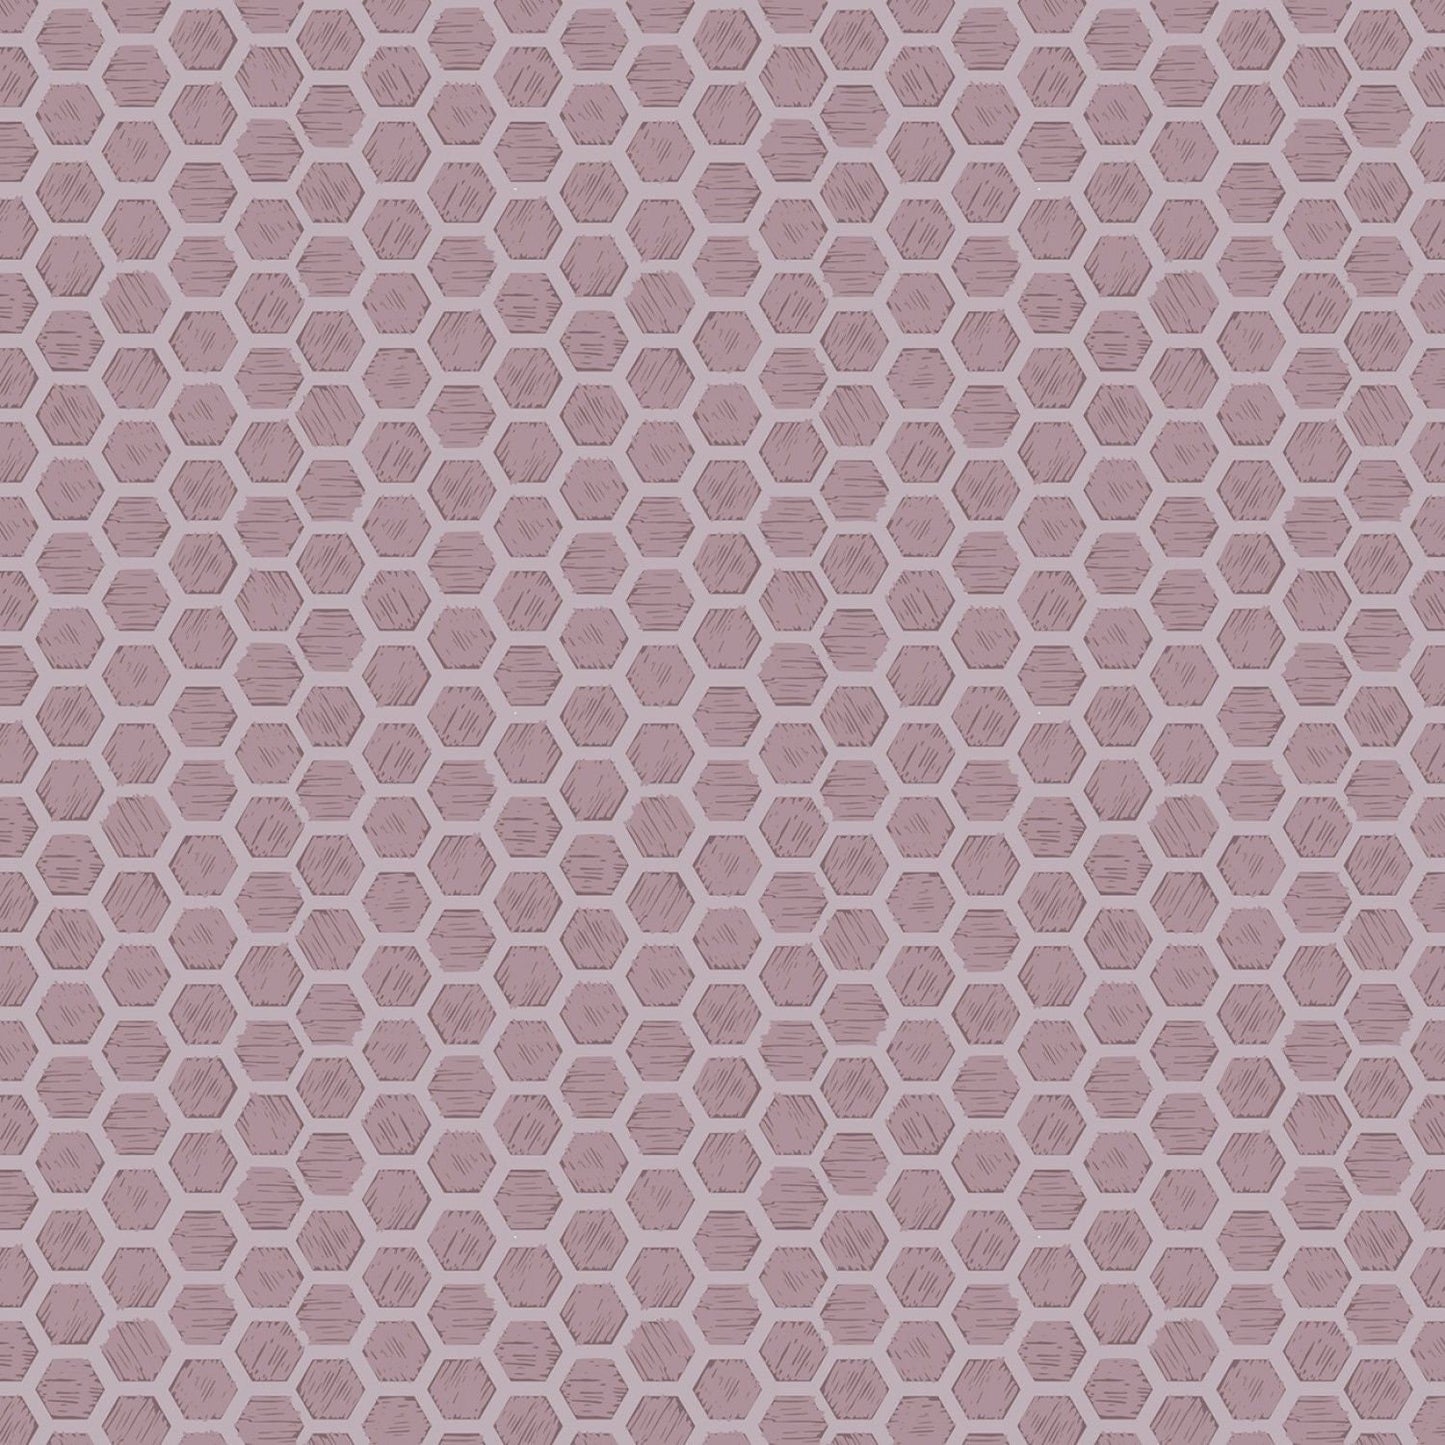 Queen Bee Honeycomb on Mid Lilac A501.3 Cotton Woven Fabric